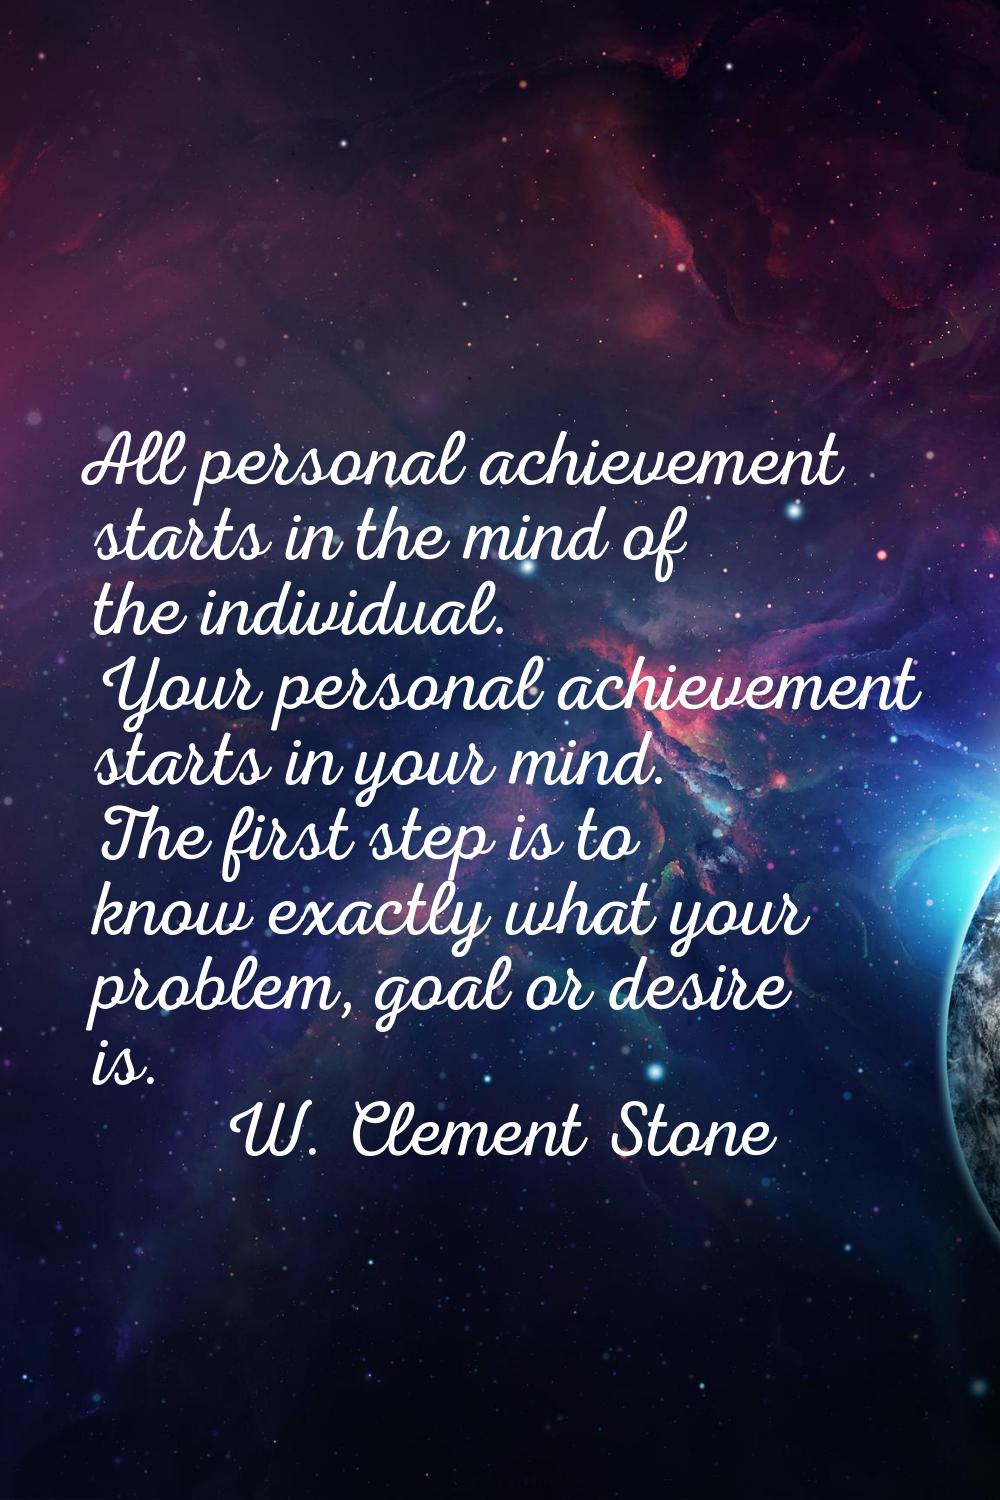 All personal achievement starts in the mind of the individual. Your personal achievement starts in 